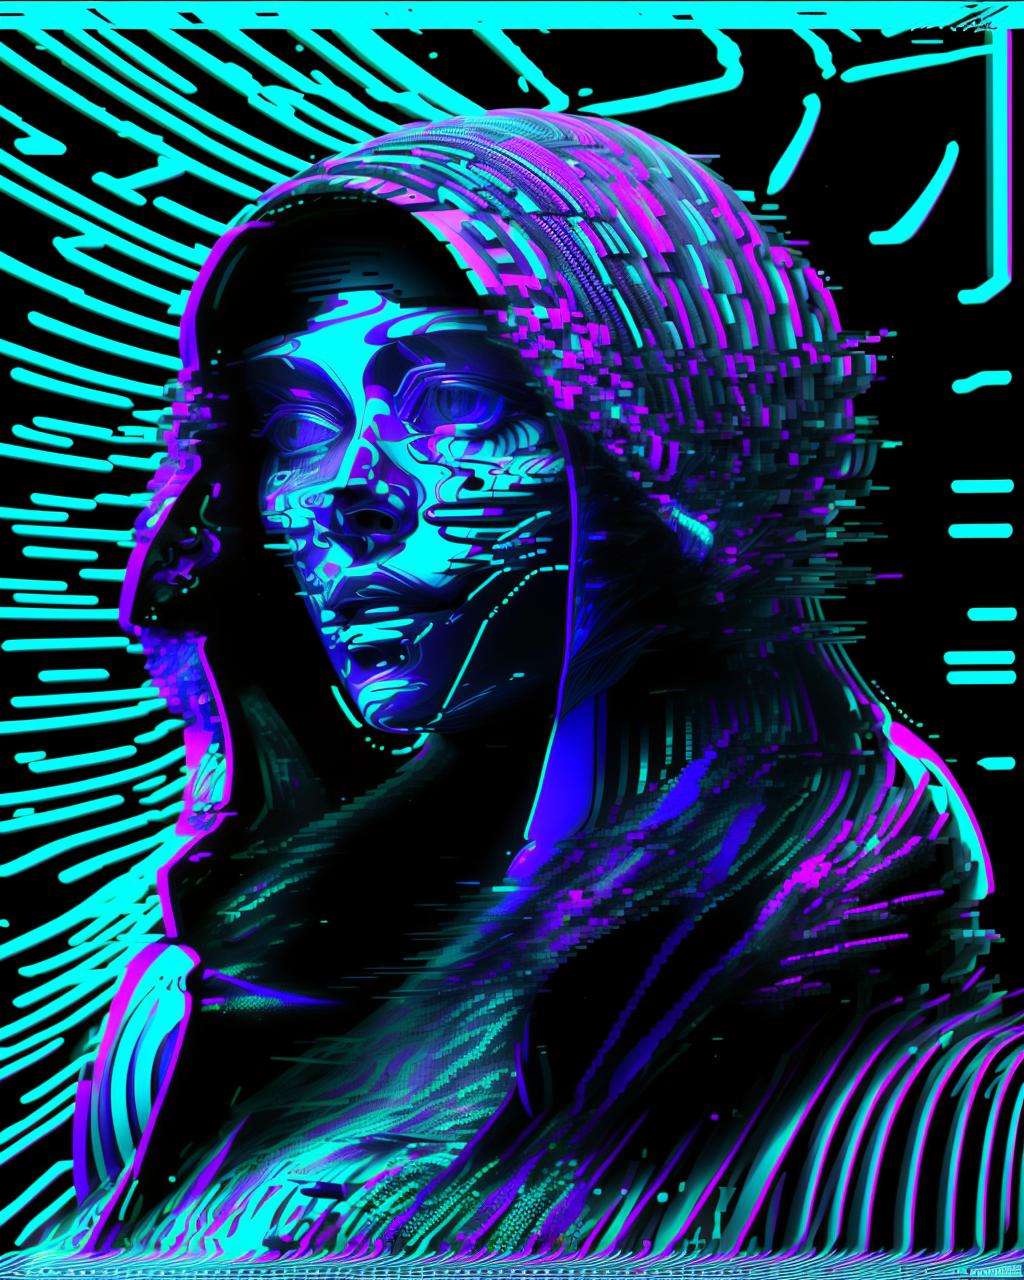 a person with a hood on their head and a long blue hair in the dark , glitch art, with a multicolored background and a pattern of lines and dots, Beeple, vaporwave colors, cyberpunk art, synchromism